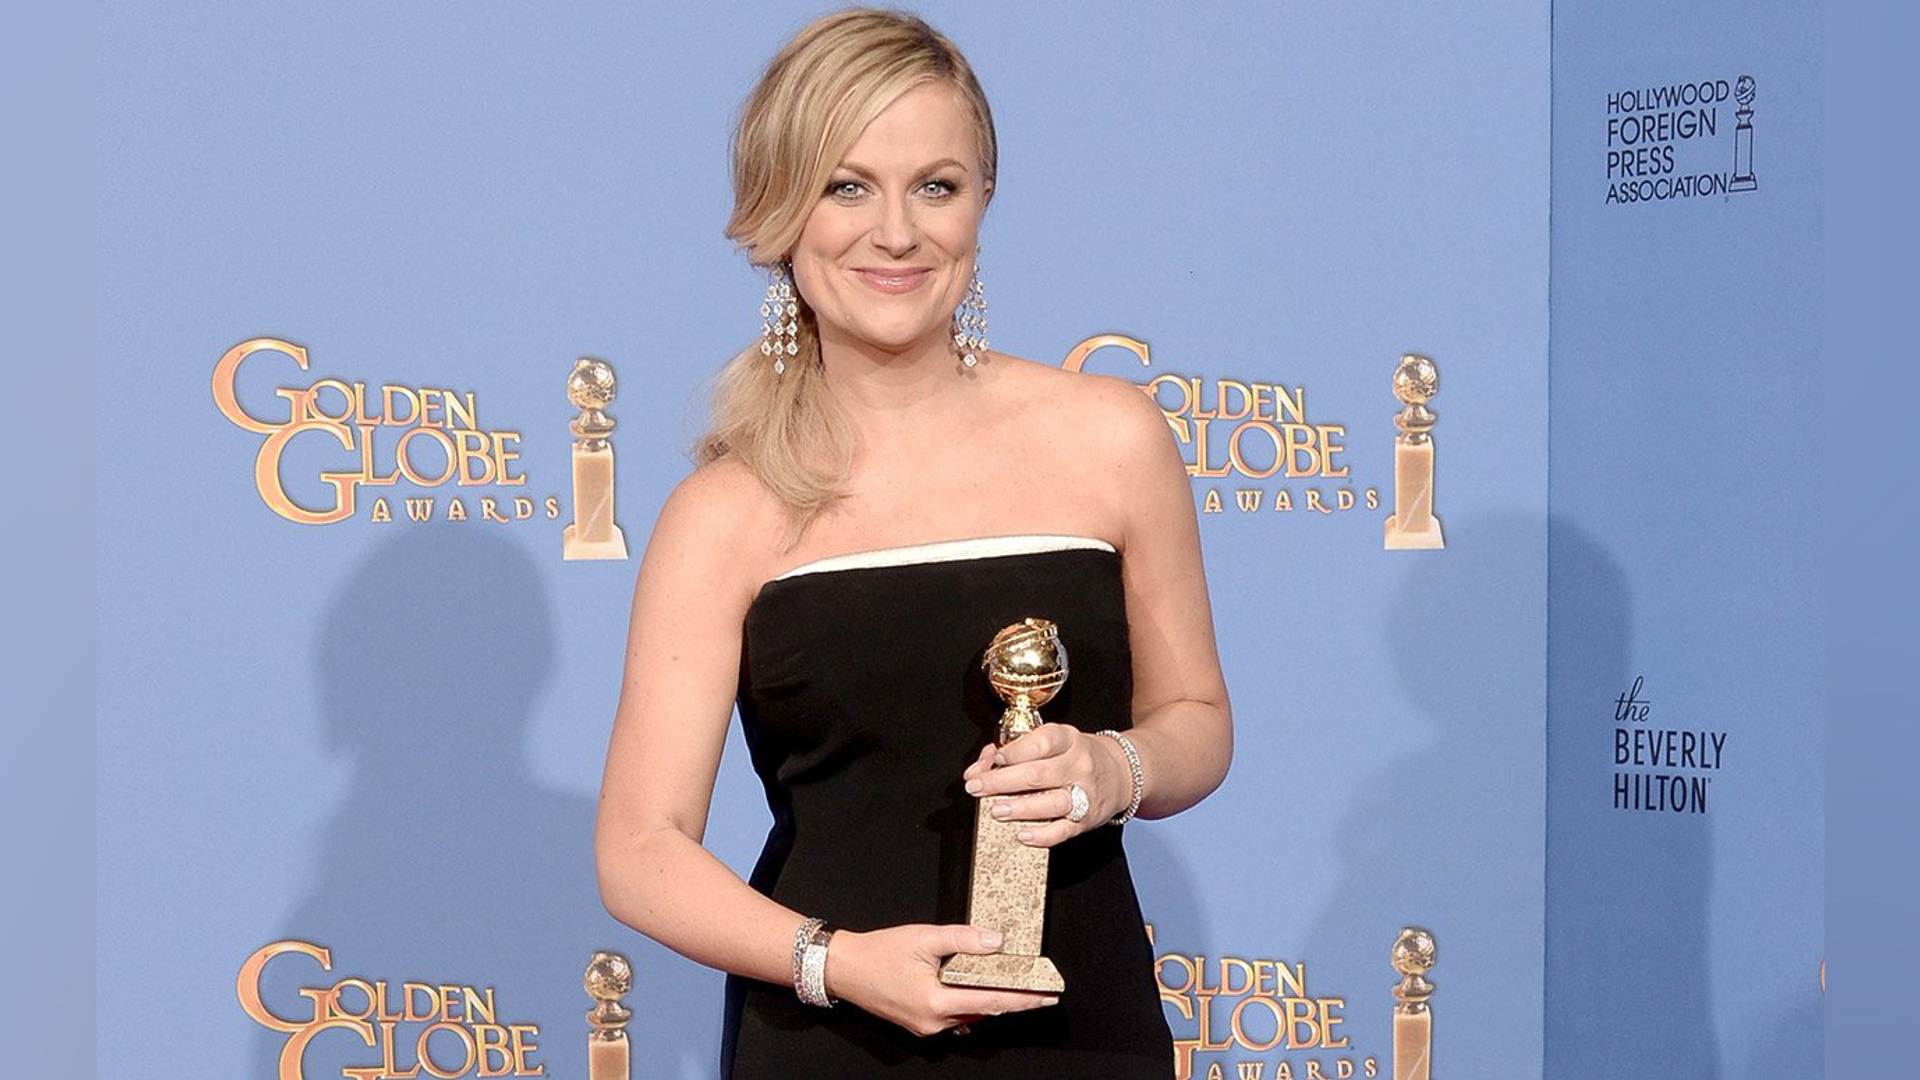 Amy Poehler with a Golden Globe